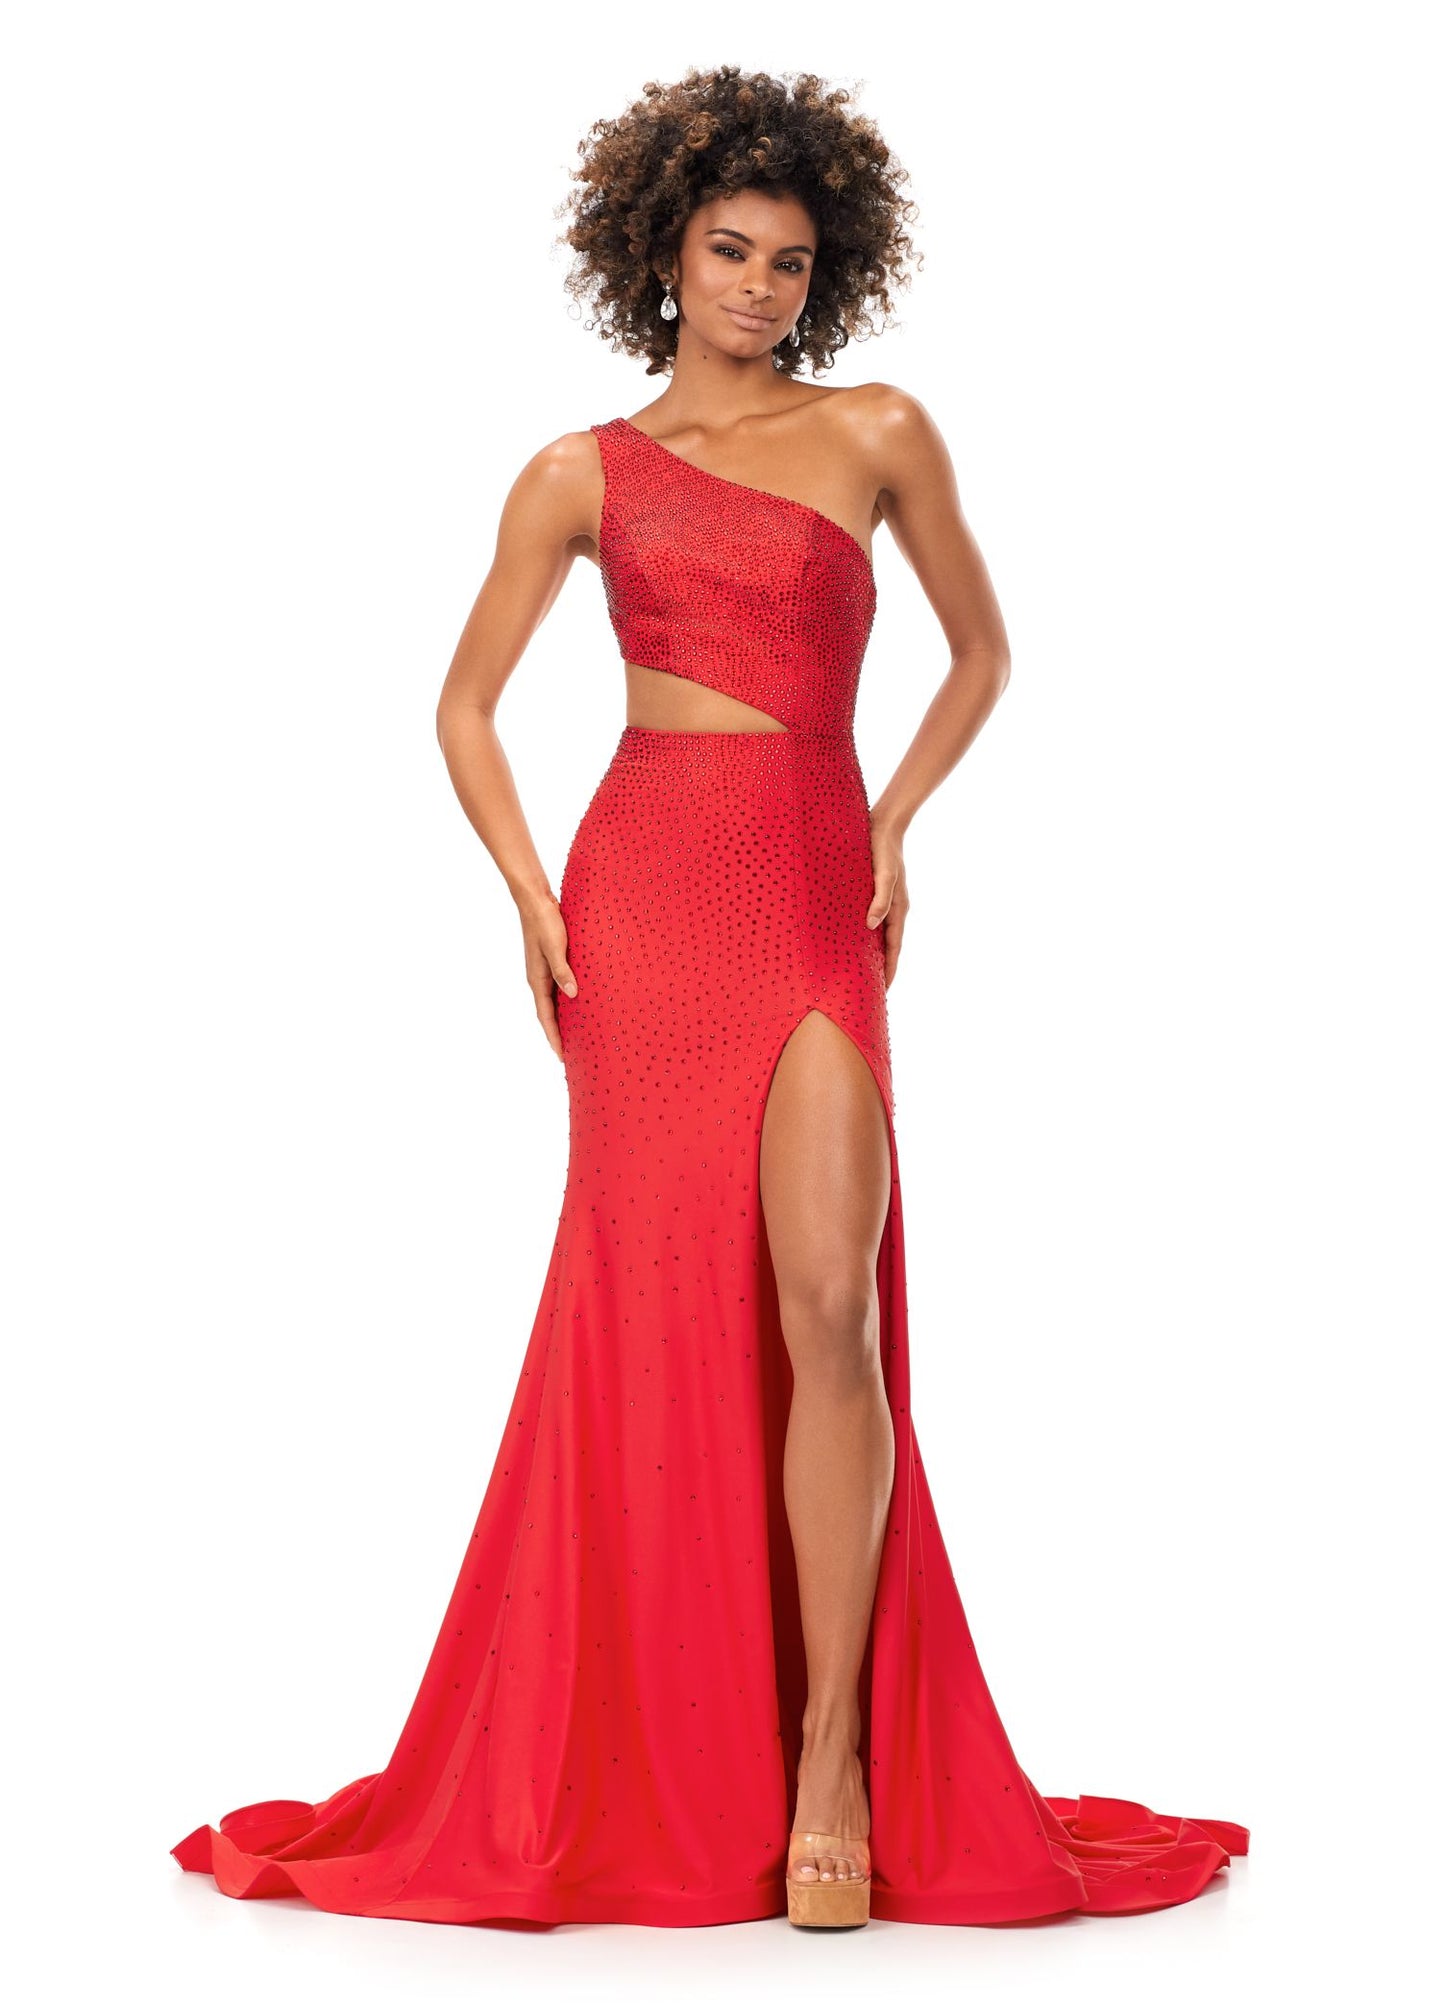 Ashley Lauren 11337 Stand out in this fitted one shoulder jersey gown embellished with heat set stones. The look is complete with an asymmetrical sharkbite cut out and left leg slit. One Shoulder Cut Out Heat Set Stones Jersey COLORS: Hot Pink, Turquoise, Black, Red, Violet